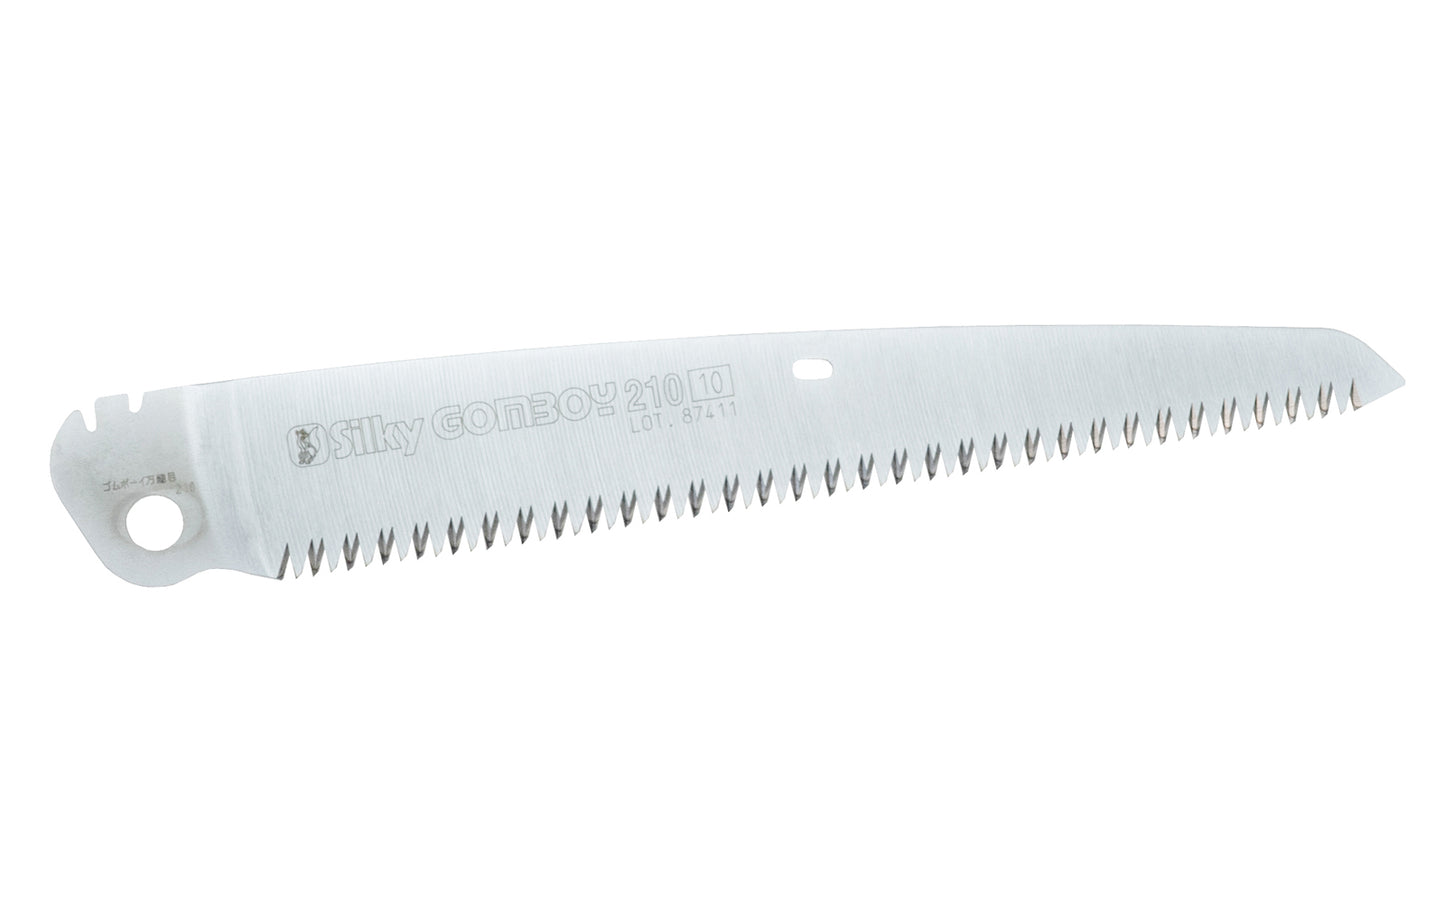 Silky Gomboy 210 mm Replacement Pruning Saw Blade that is great for use on green woods, & dry woods too. Teeth on the saw blade have 9 TPI which allows for very fast aggressive cutting. Teeth are impulse hardened which makes the blade tough & durable for prolonged life & wear ~ Fast aggressive cutting blade